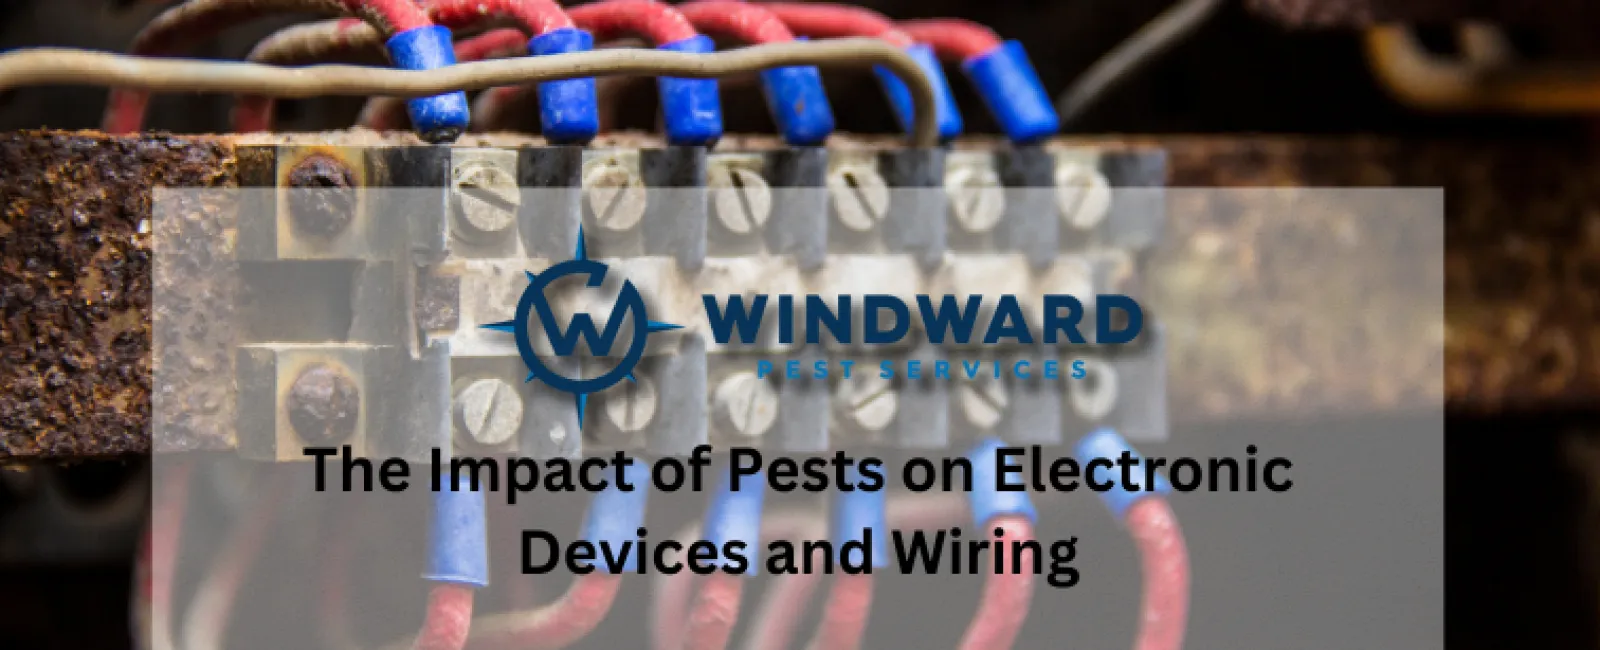 The Impact of Pests on Electronic Devices and Wiring